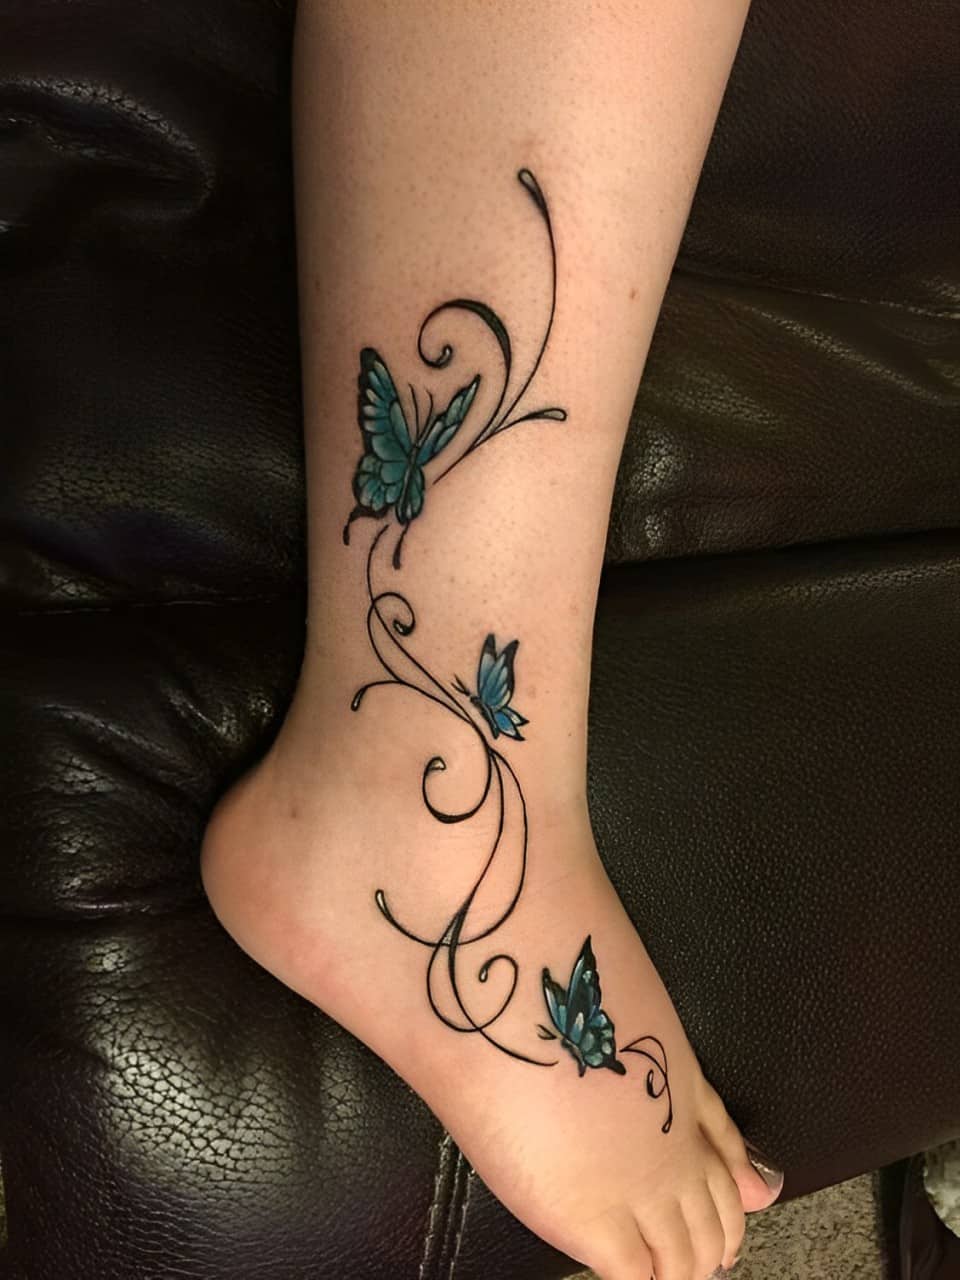 Foot tattoo featuring butterflies and vines.